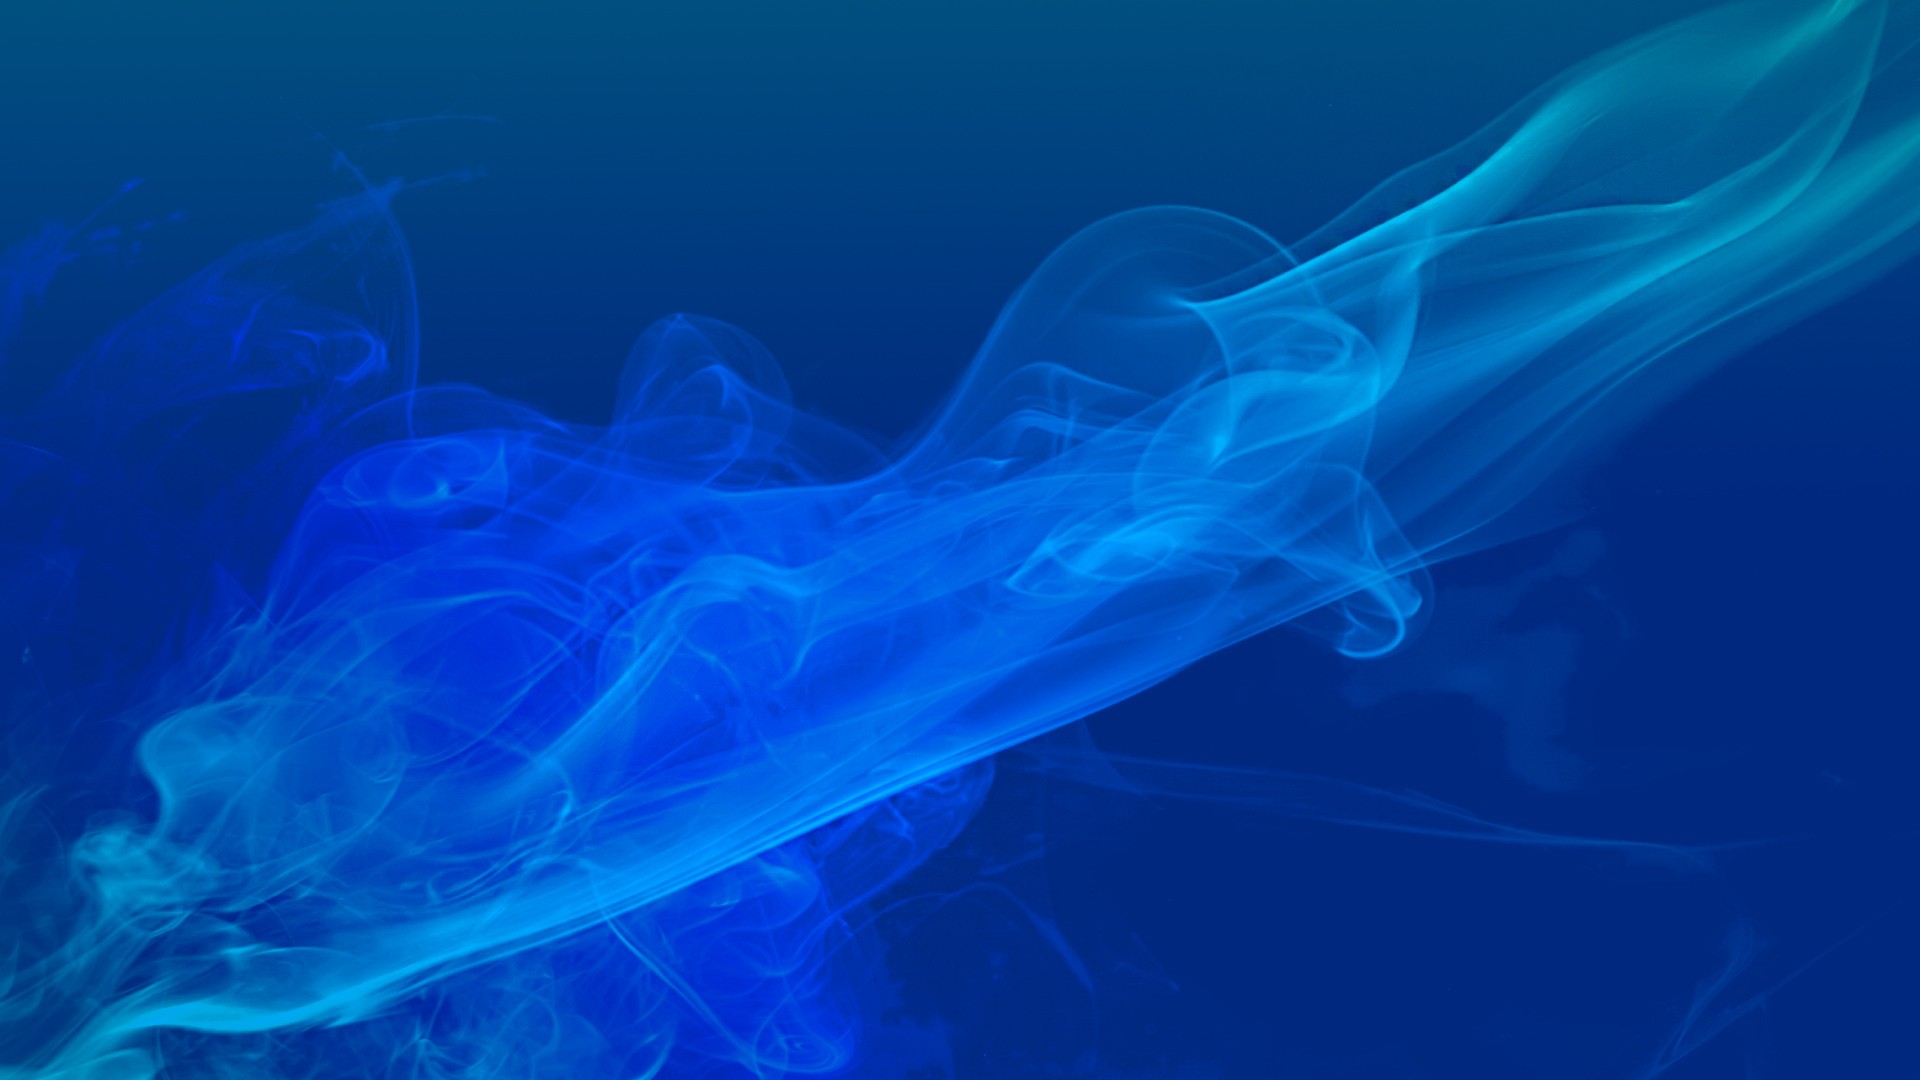 Wallpapers for Blue Smoke | Resolution 1920x1080px